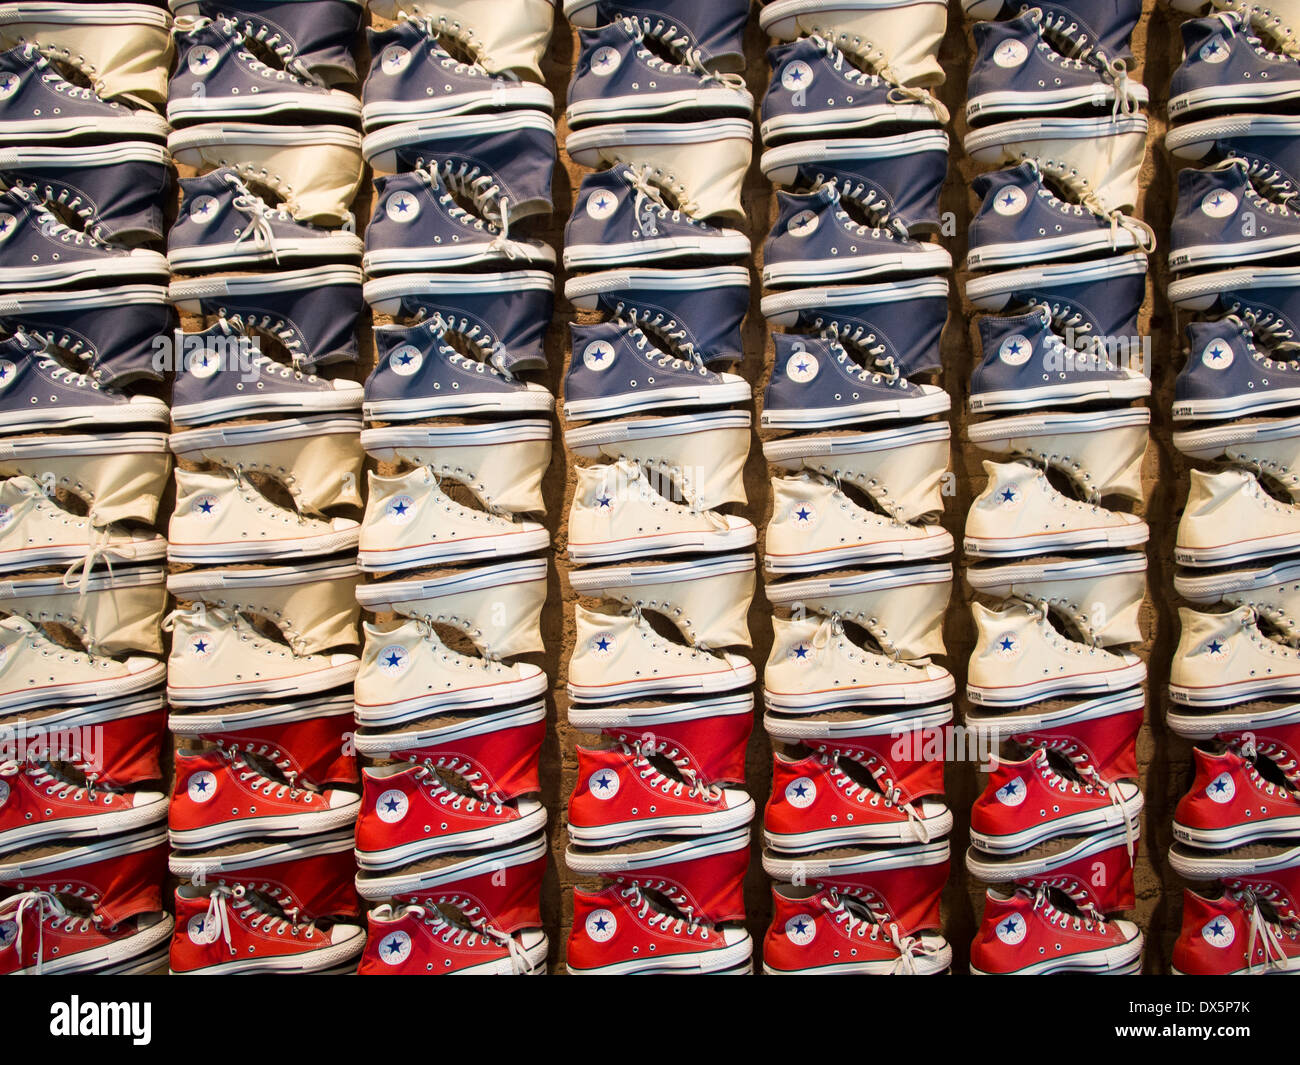 Converse All Star, New York Banque D'Images